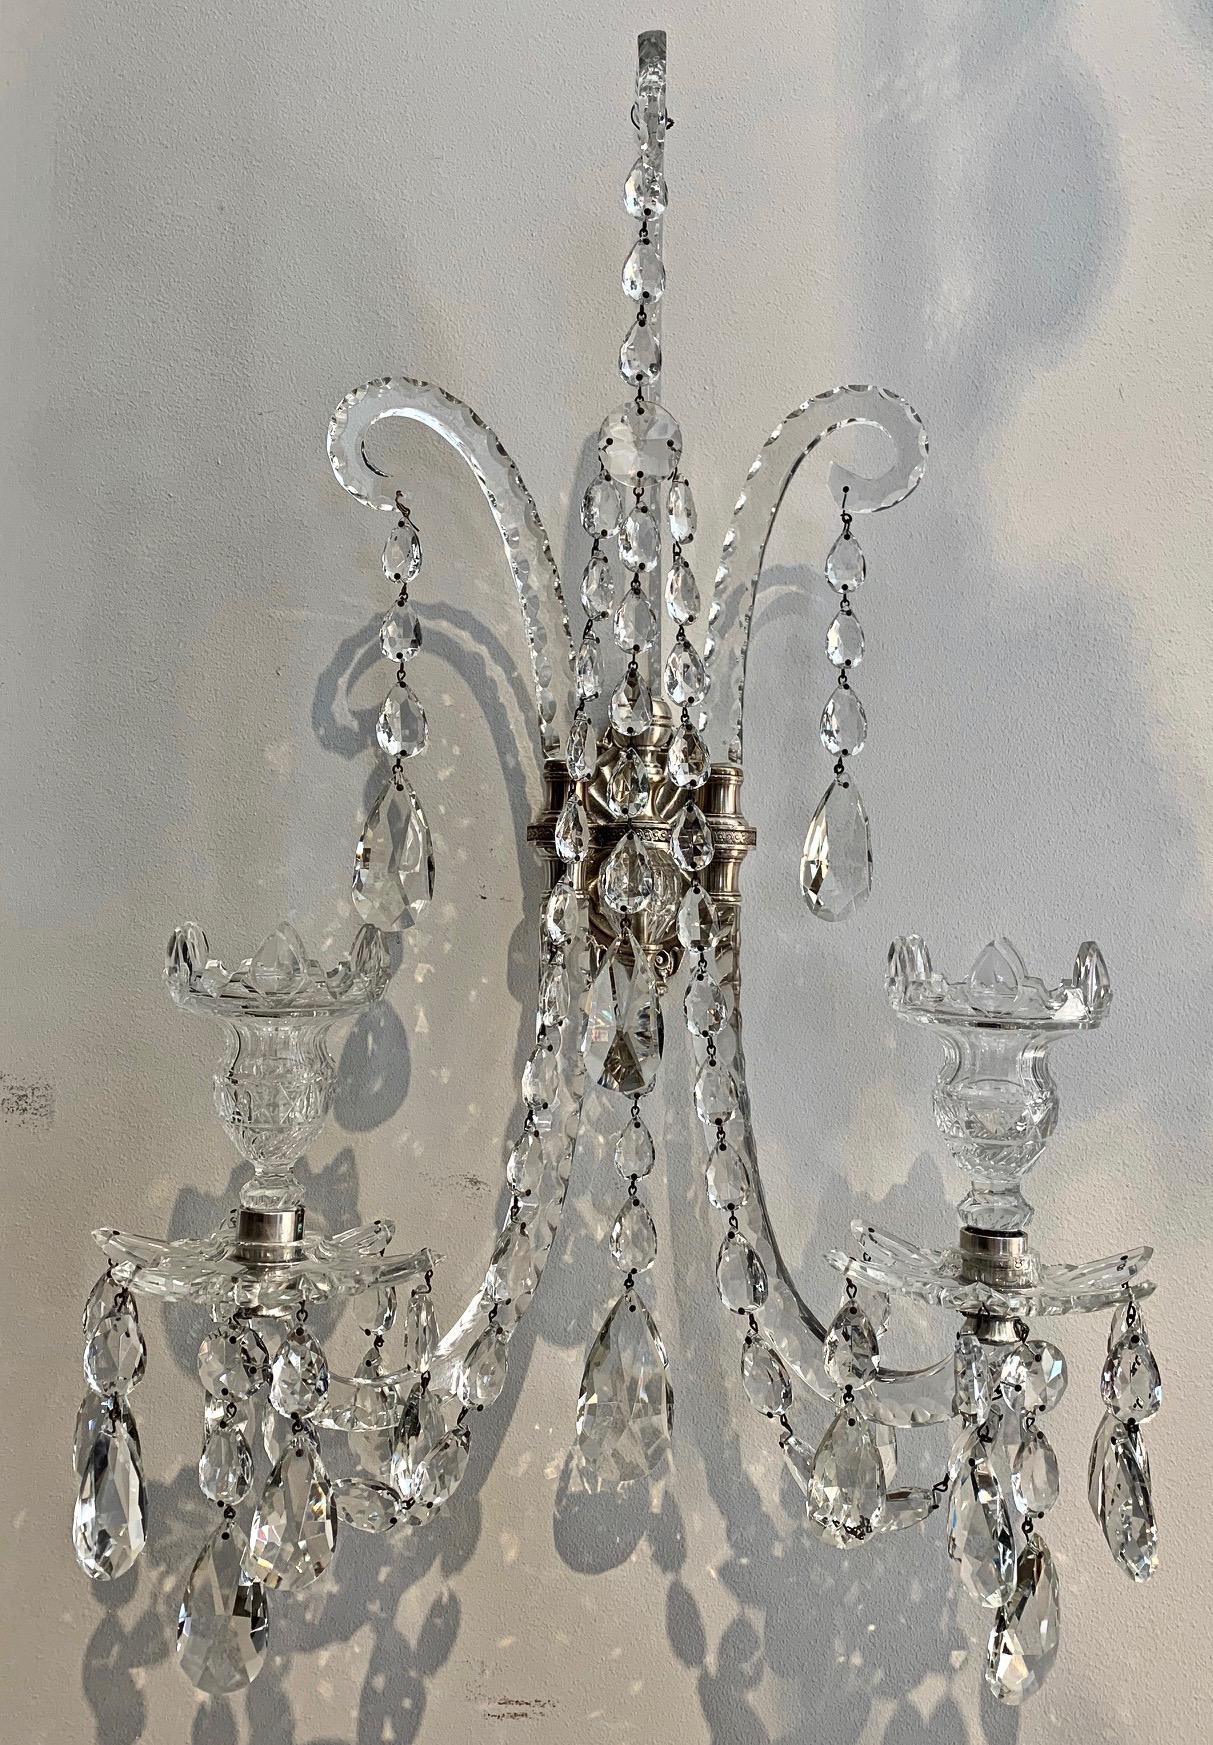 Set of four cut crystal Georgian style wall sconces. Beautifully hand blown and cut crystal two-arm wall sconces. Neoclassical Adam design in late Georgian style. Neoclassical silvered brass backplate. Excellent condition. Crystal all